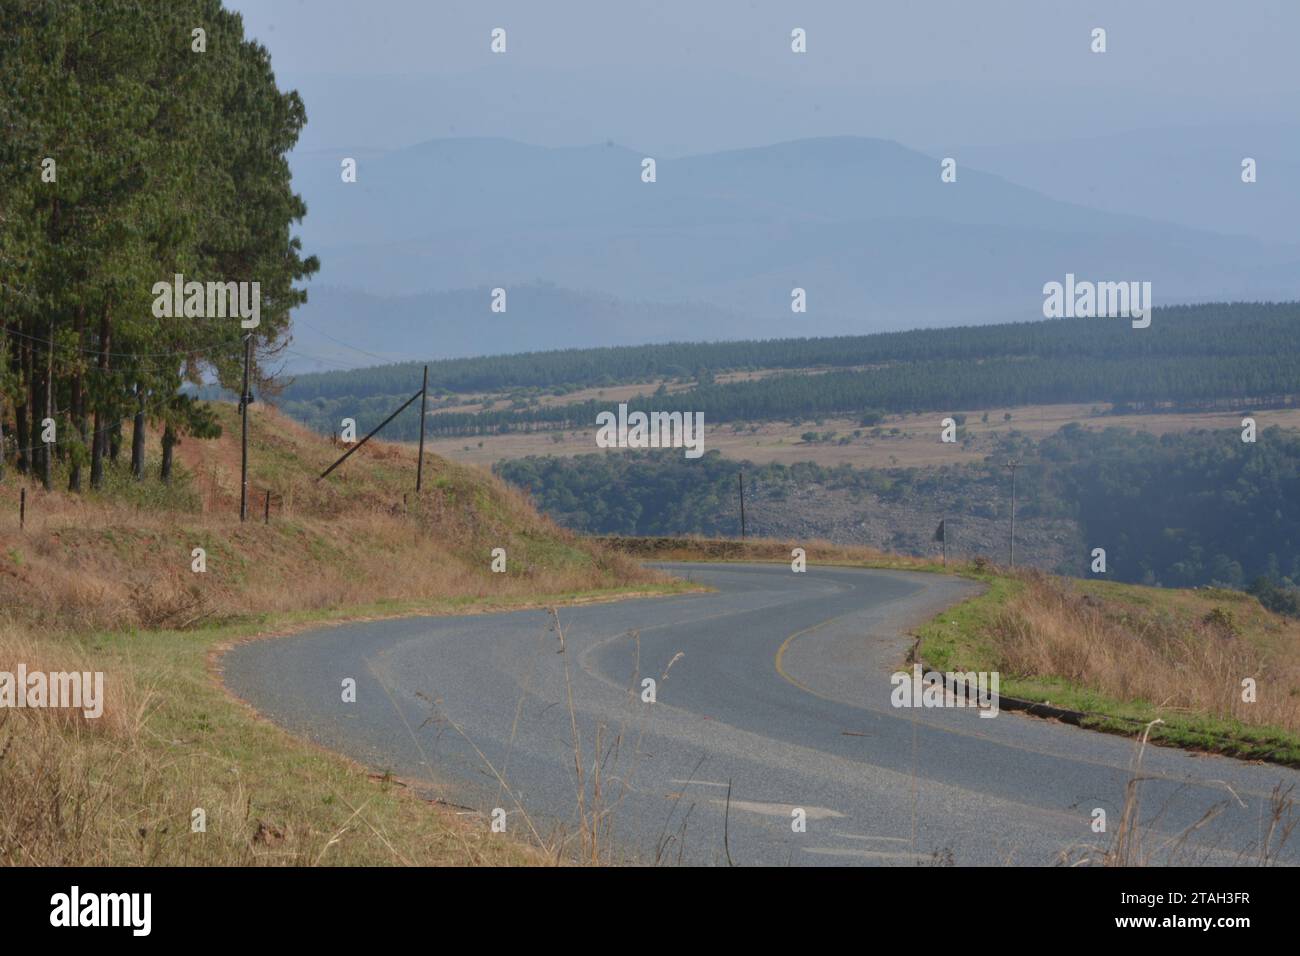 Road over farm lands in South Africa towards distant mountains Road over farm lands in South Africa towards distant mountains Stock Photo